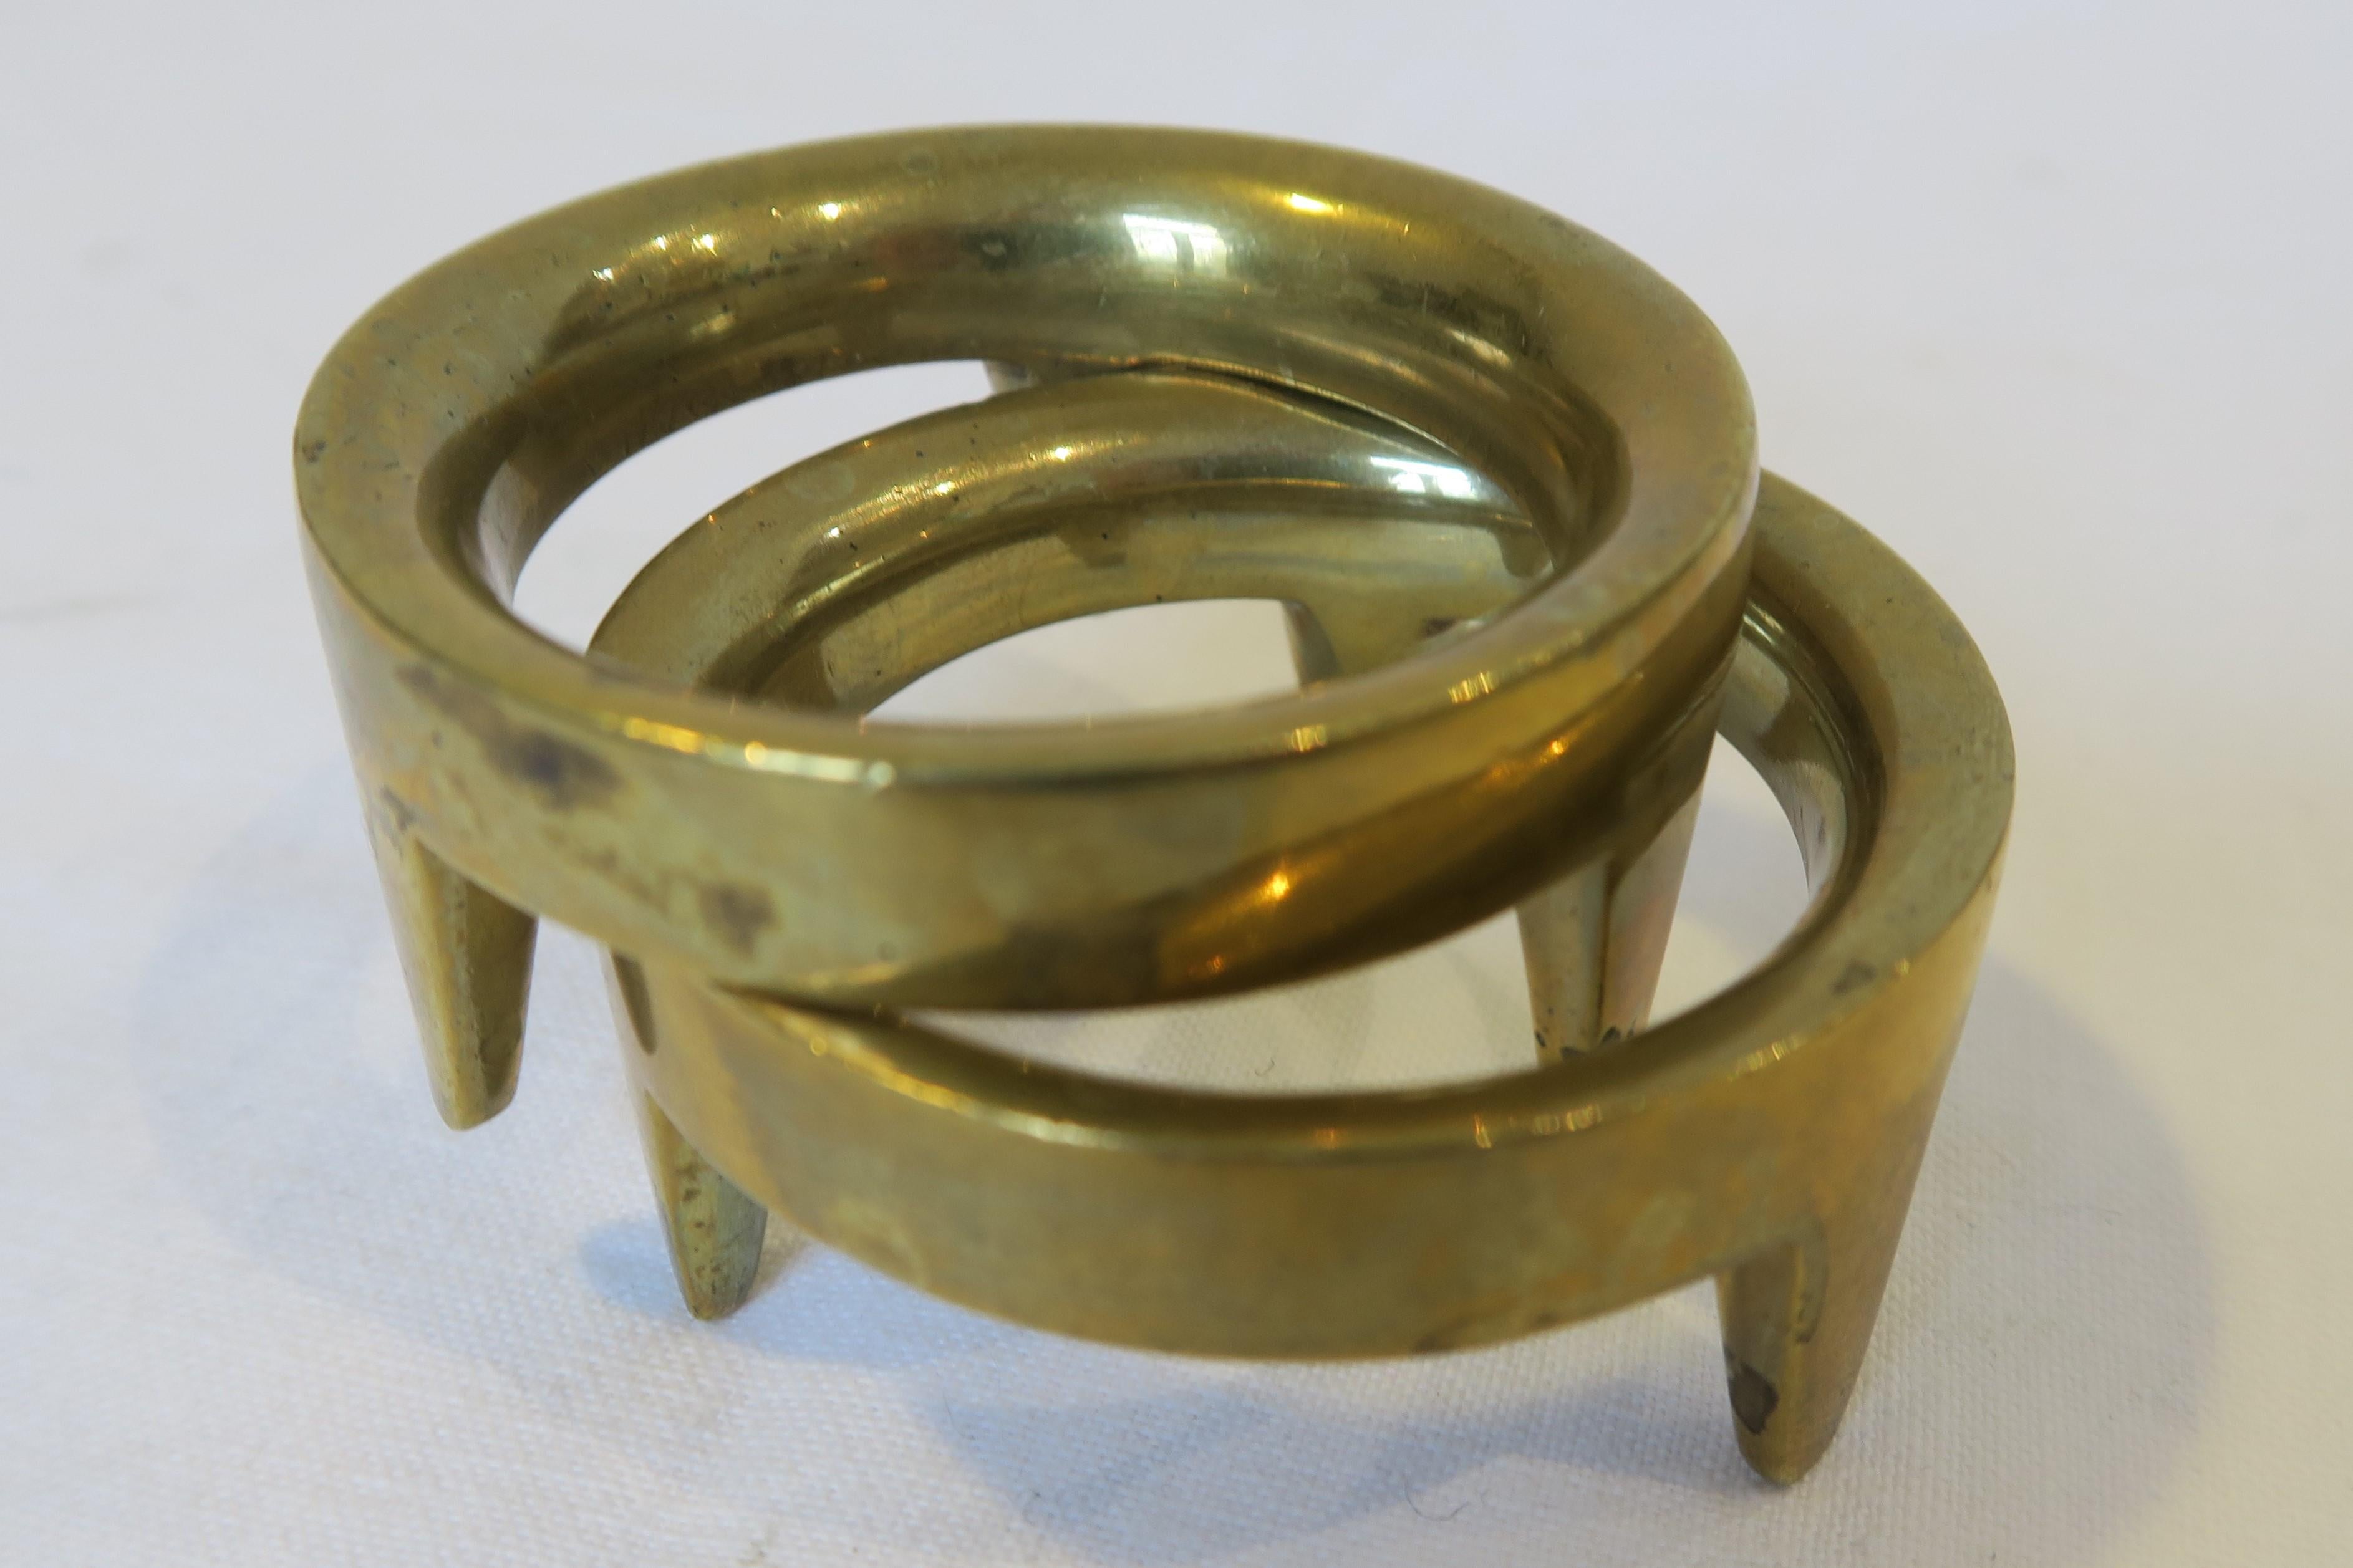 For sale is a beautiful set of two matching egg cups. Both were crafted from brass and designed by the renowned workshops of Carl Auböck in Austria. They consist of an elegant, slim band with three little pointy, rounded feet are examples of the